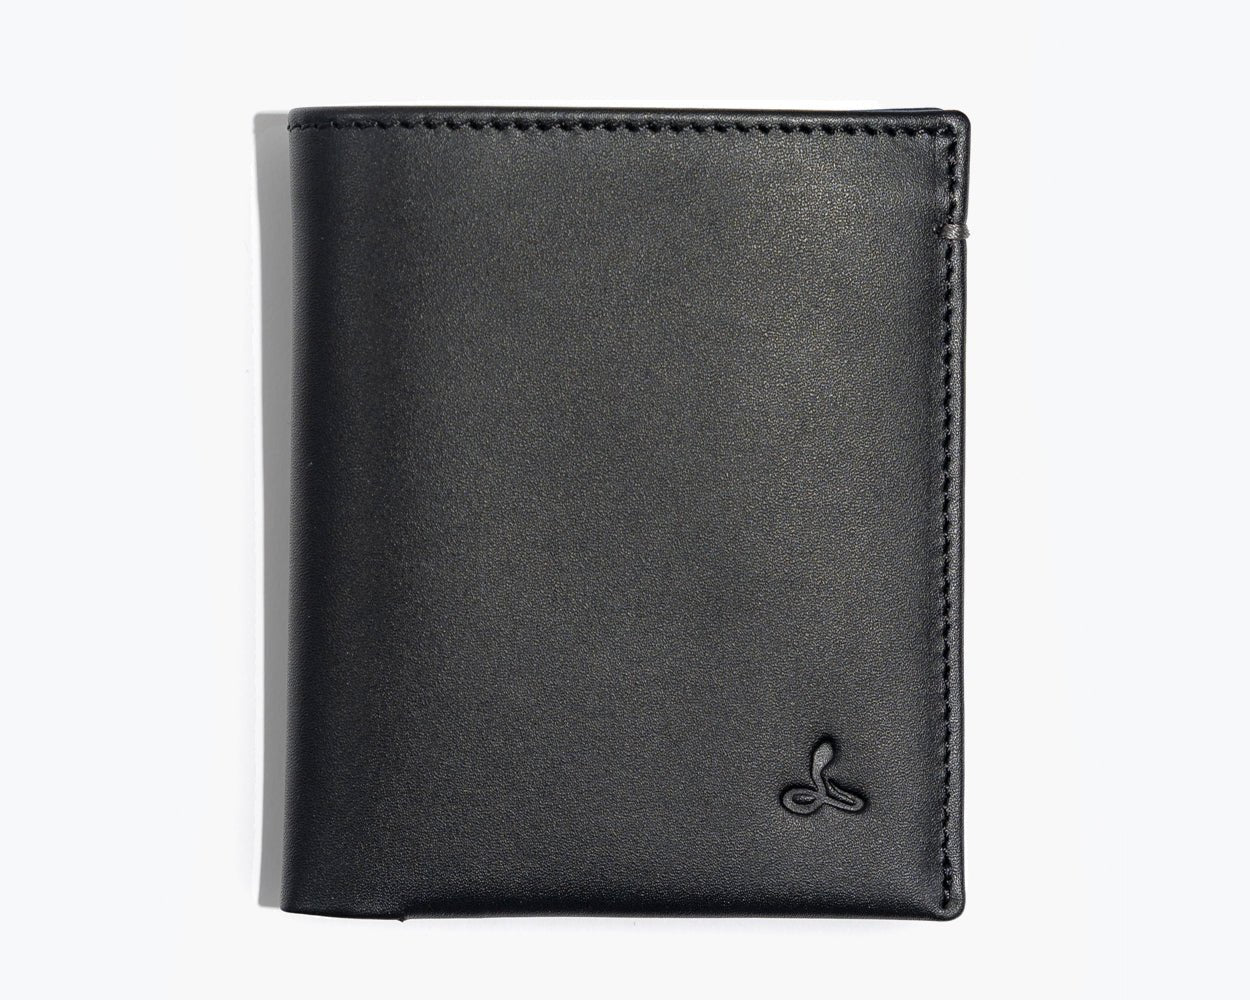 LEATHER BIFOLD WALLET - THE ESSENTIAL COLLECTION Black/Grey - Snakehive UK